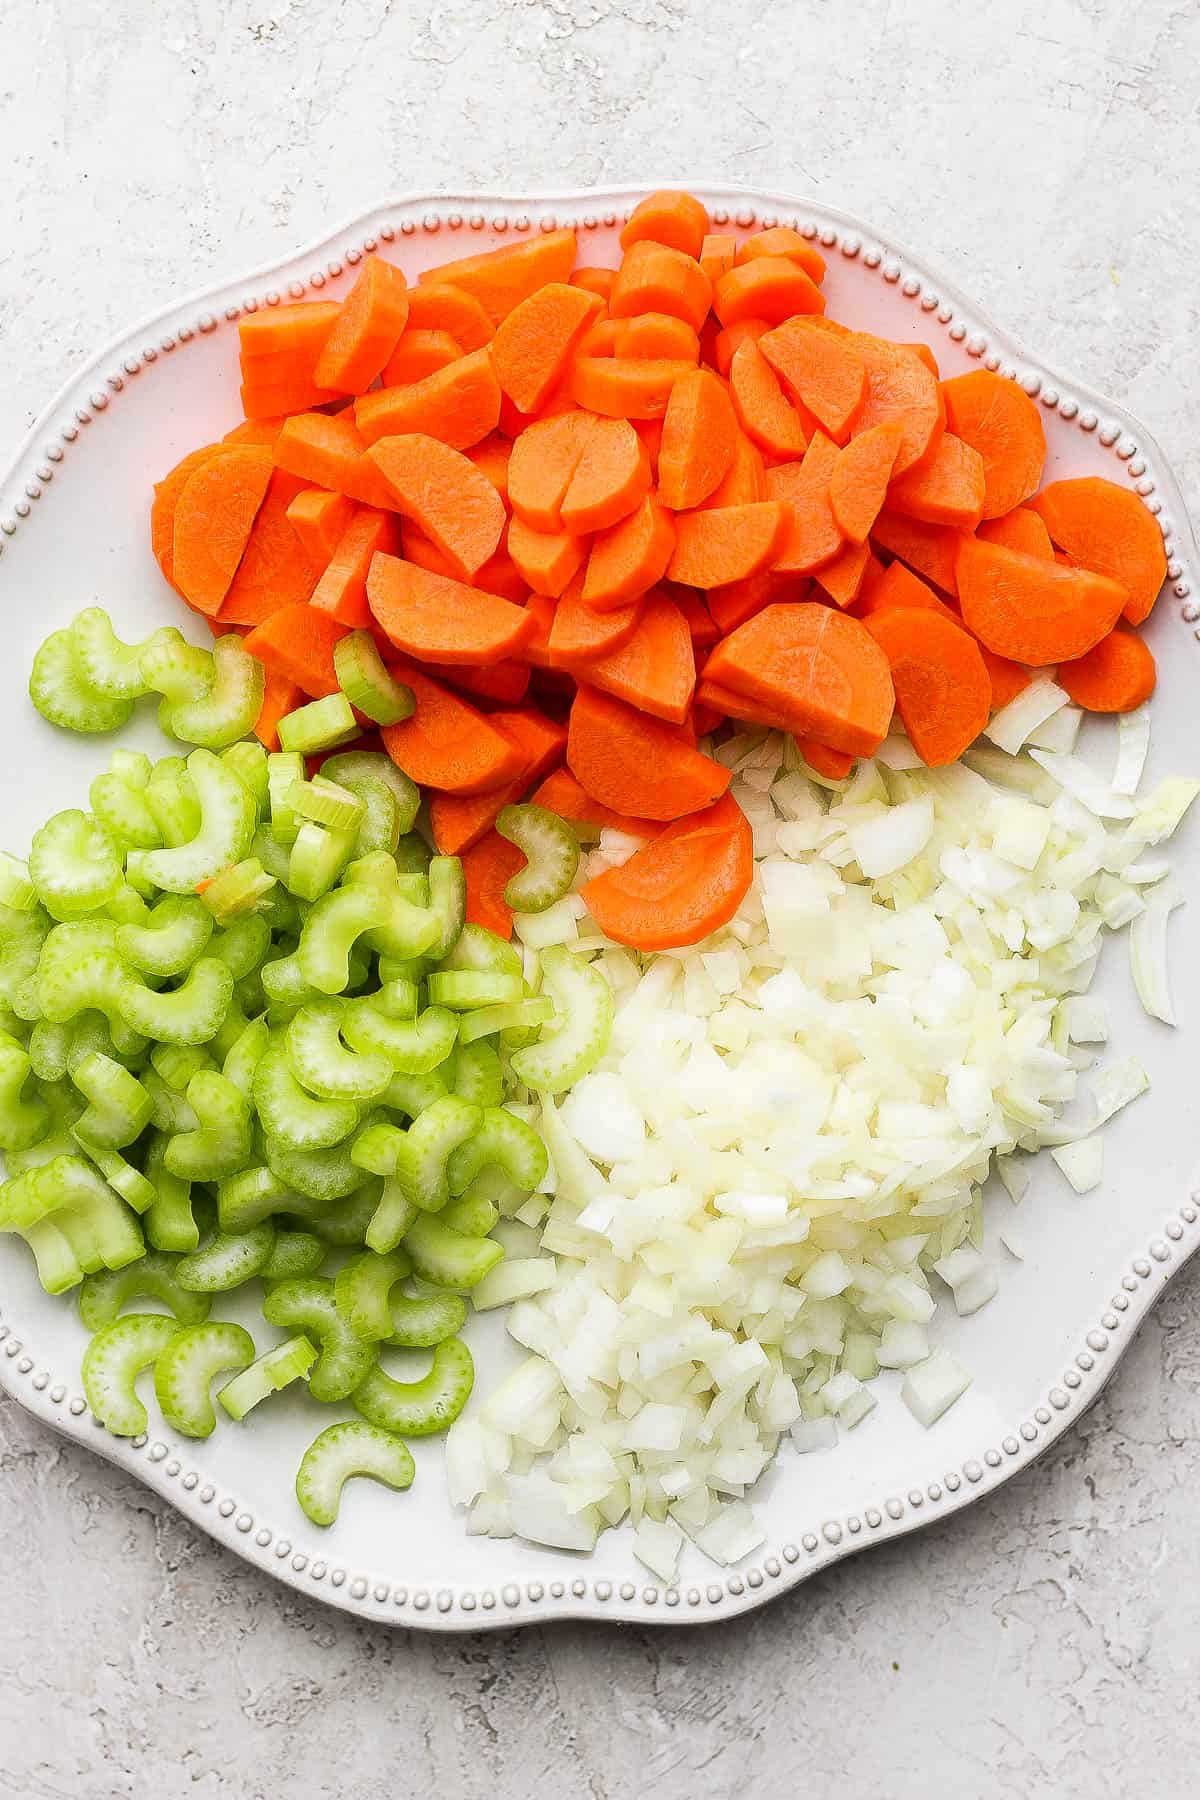 Chopped carrots, celery, and onion on a large plate.